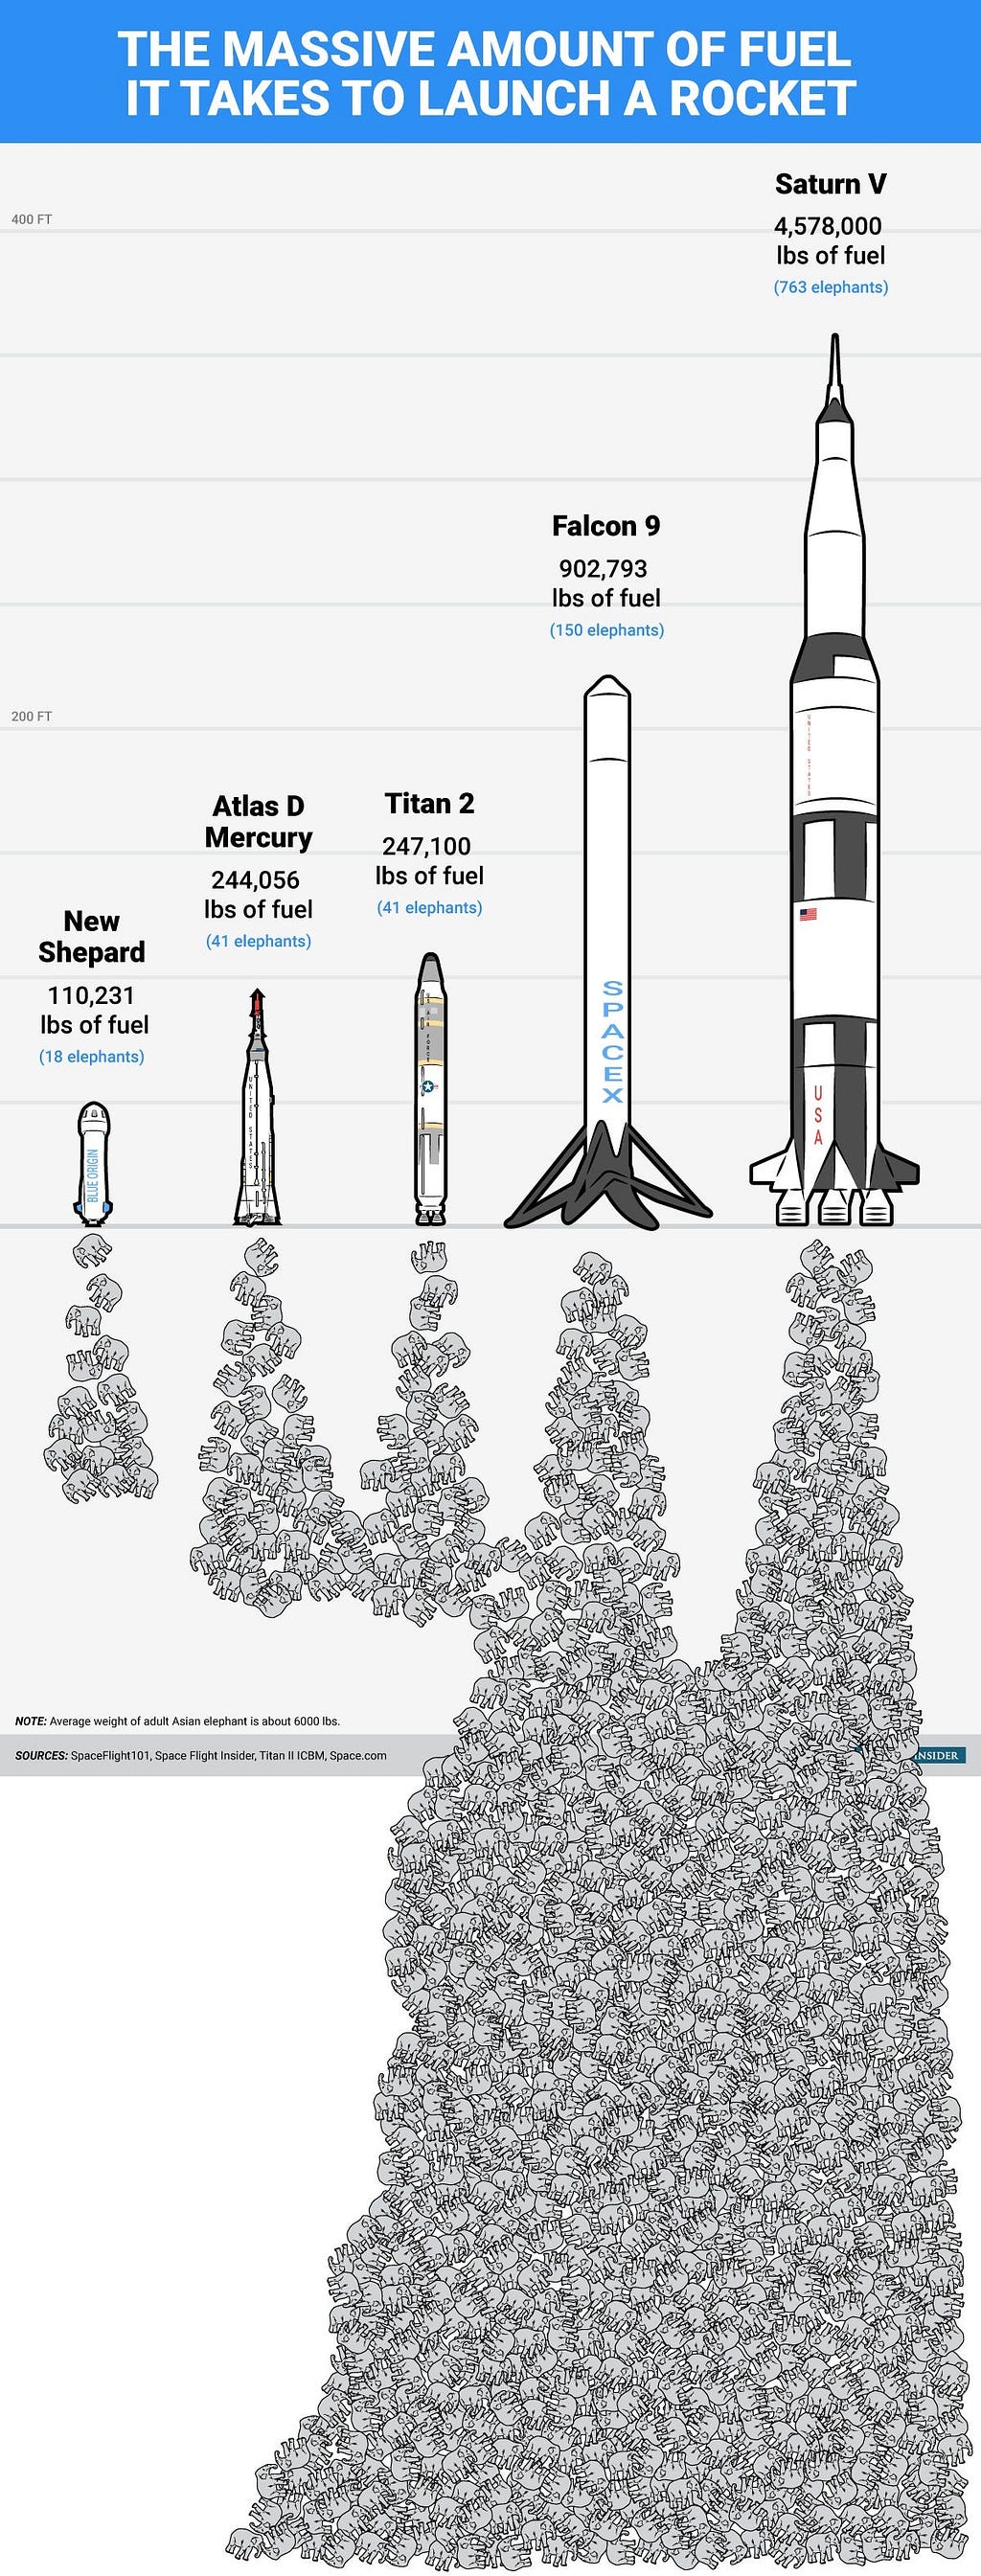 The mass of rocket fuel utilized by various rockets compared to its mass equivalence with an elephant